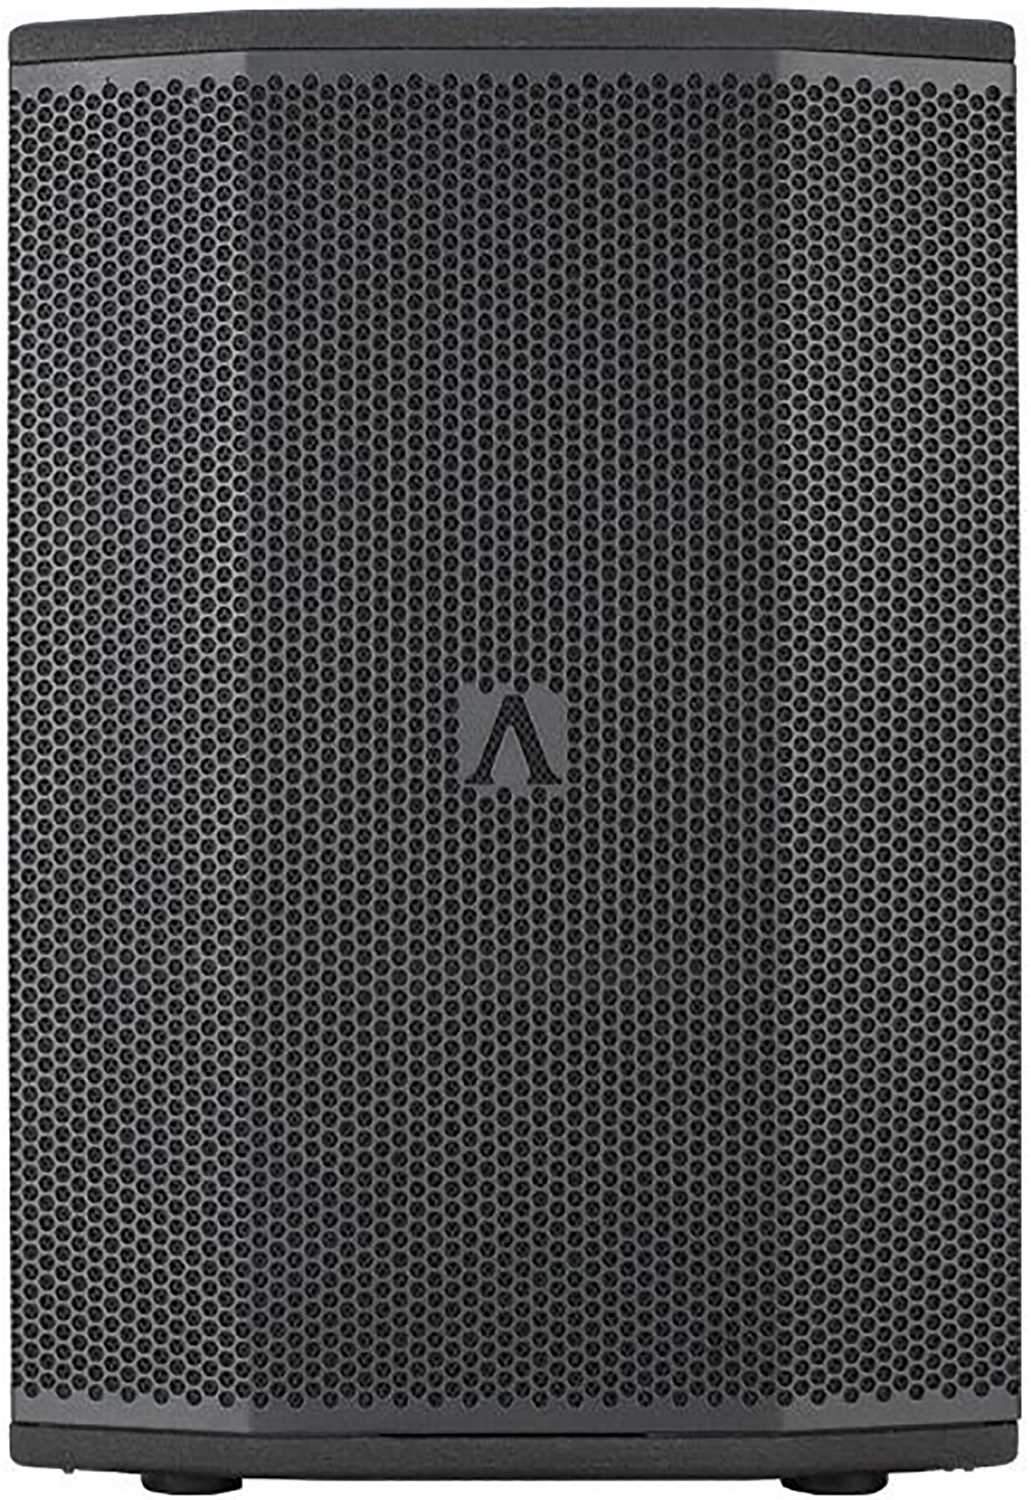 Avante Imperio Sub10 1x10 400W Powered Subwoofer - PSSL ProSound and Stage Lighting